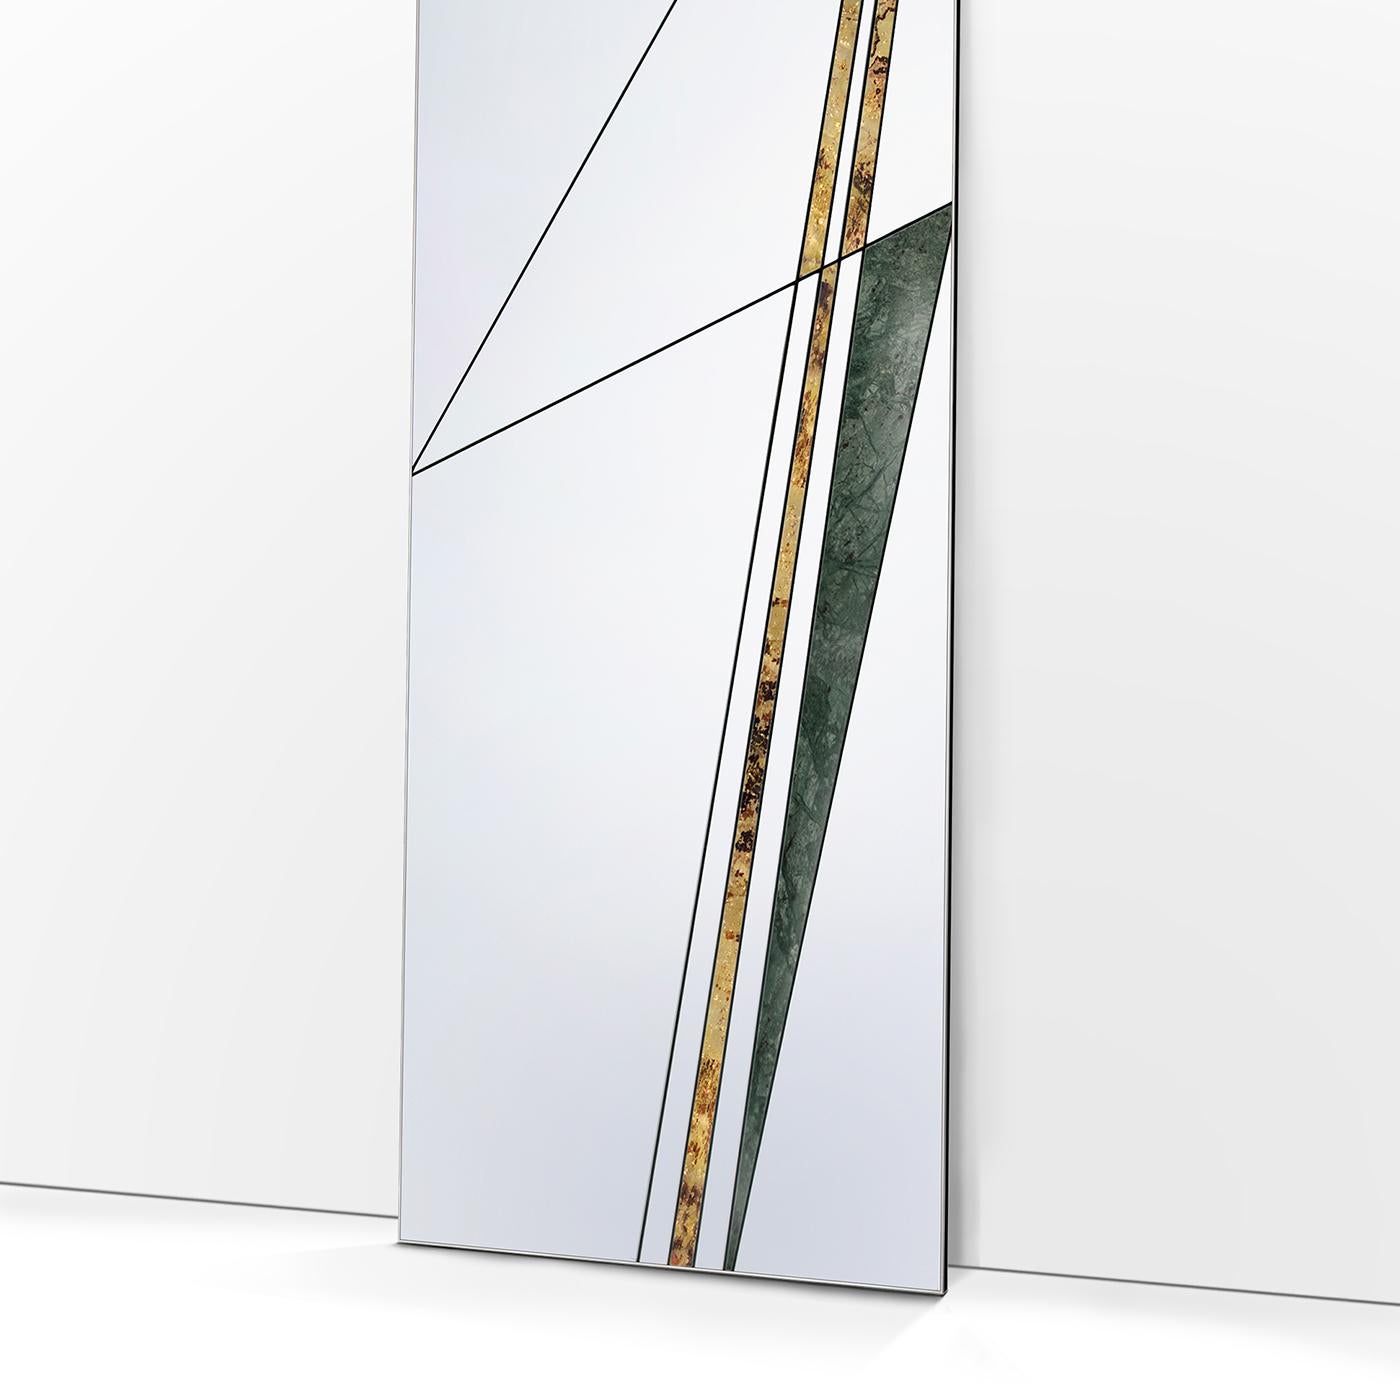 A bold series of lines intersect at the surface of this stunning mirror, creating an abstract interpretation of the network of roads in ancient Roman times. This stunning design is manufactured by hand on a wooden base, joining mirrored glass